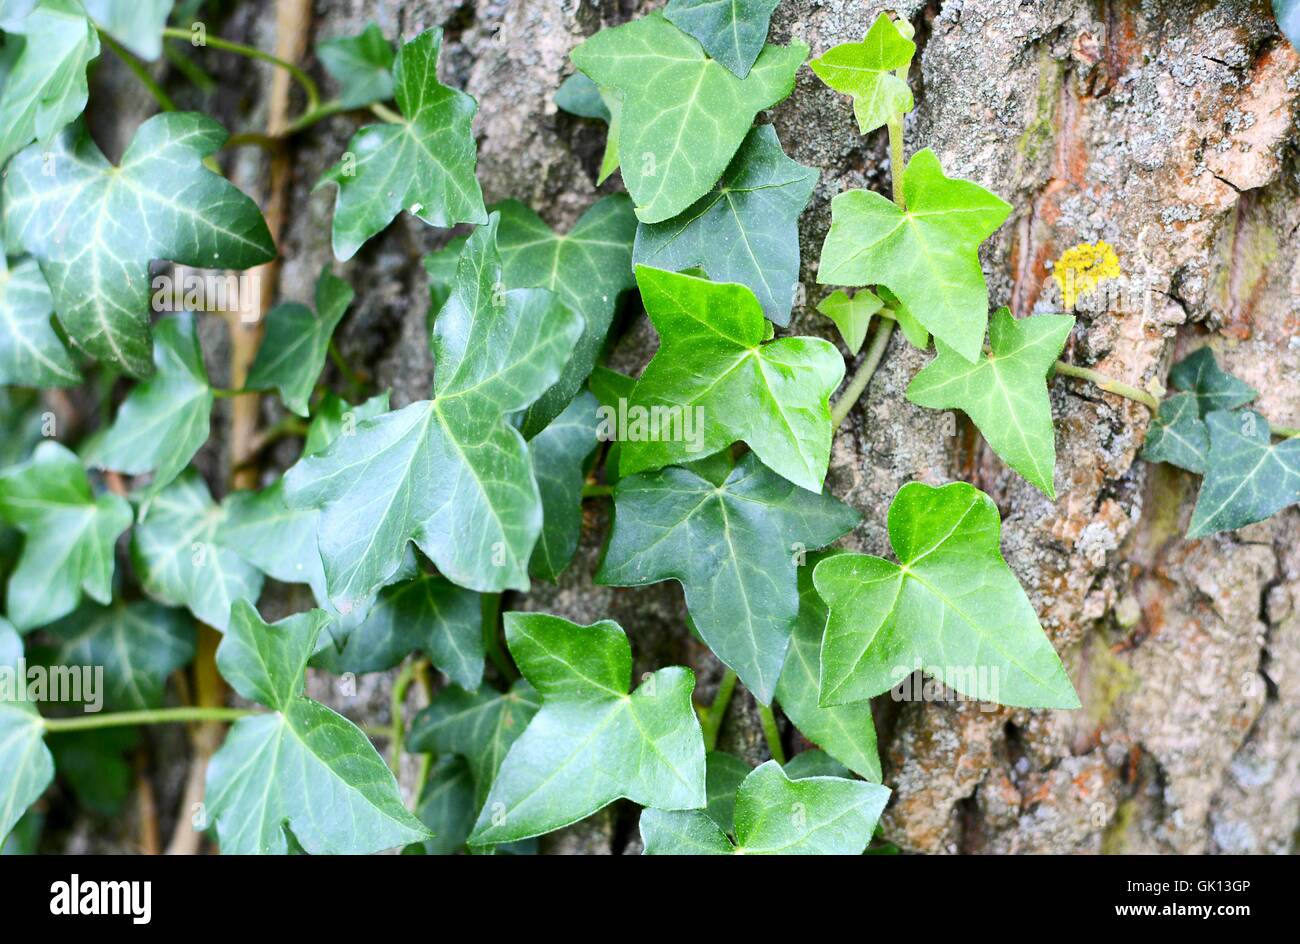 Closeup of tree trunk overgrown with ivy leaves. Green ivy plant on bark. Stock Photo